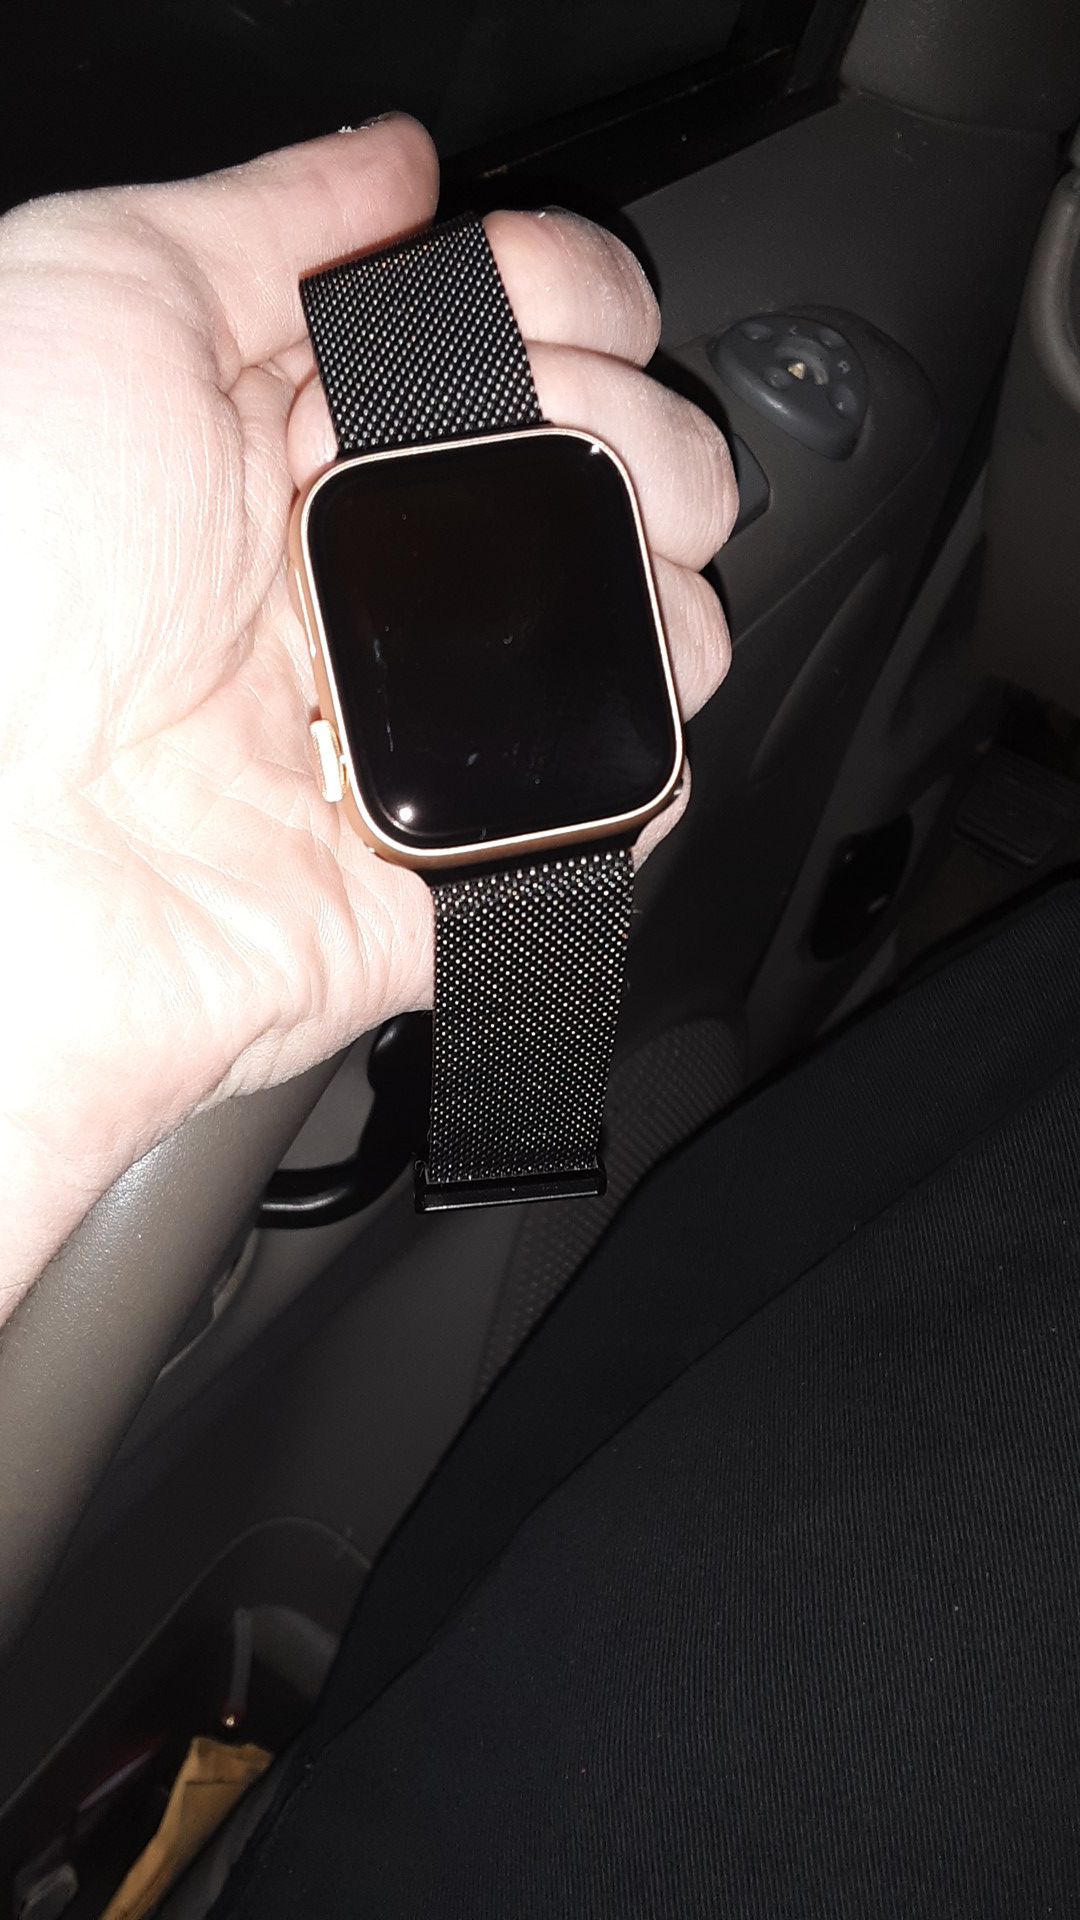 Series 5 40mm rose gold apple watch (gps/cellular)